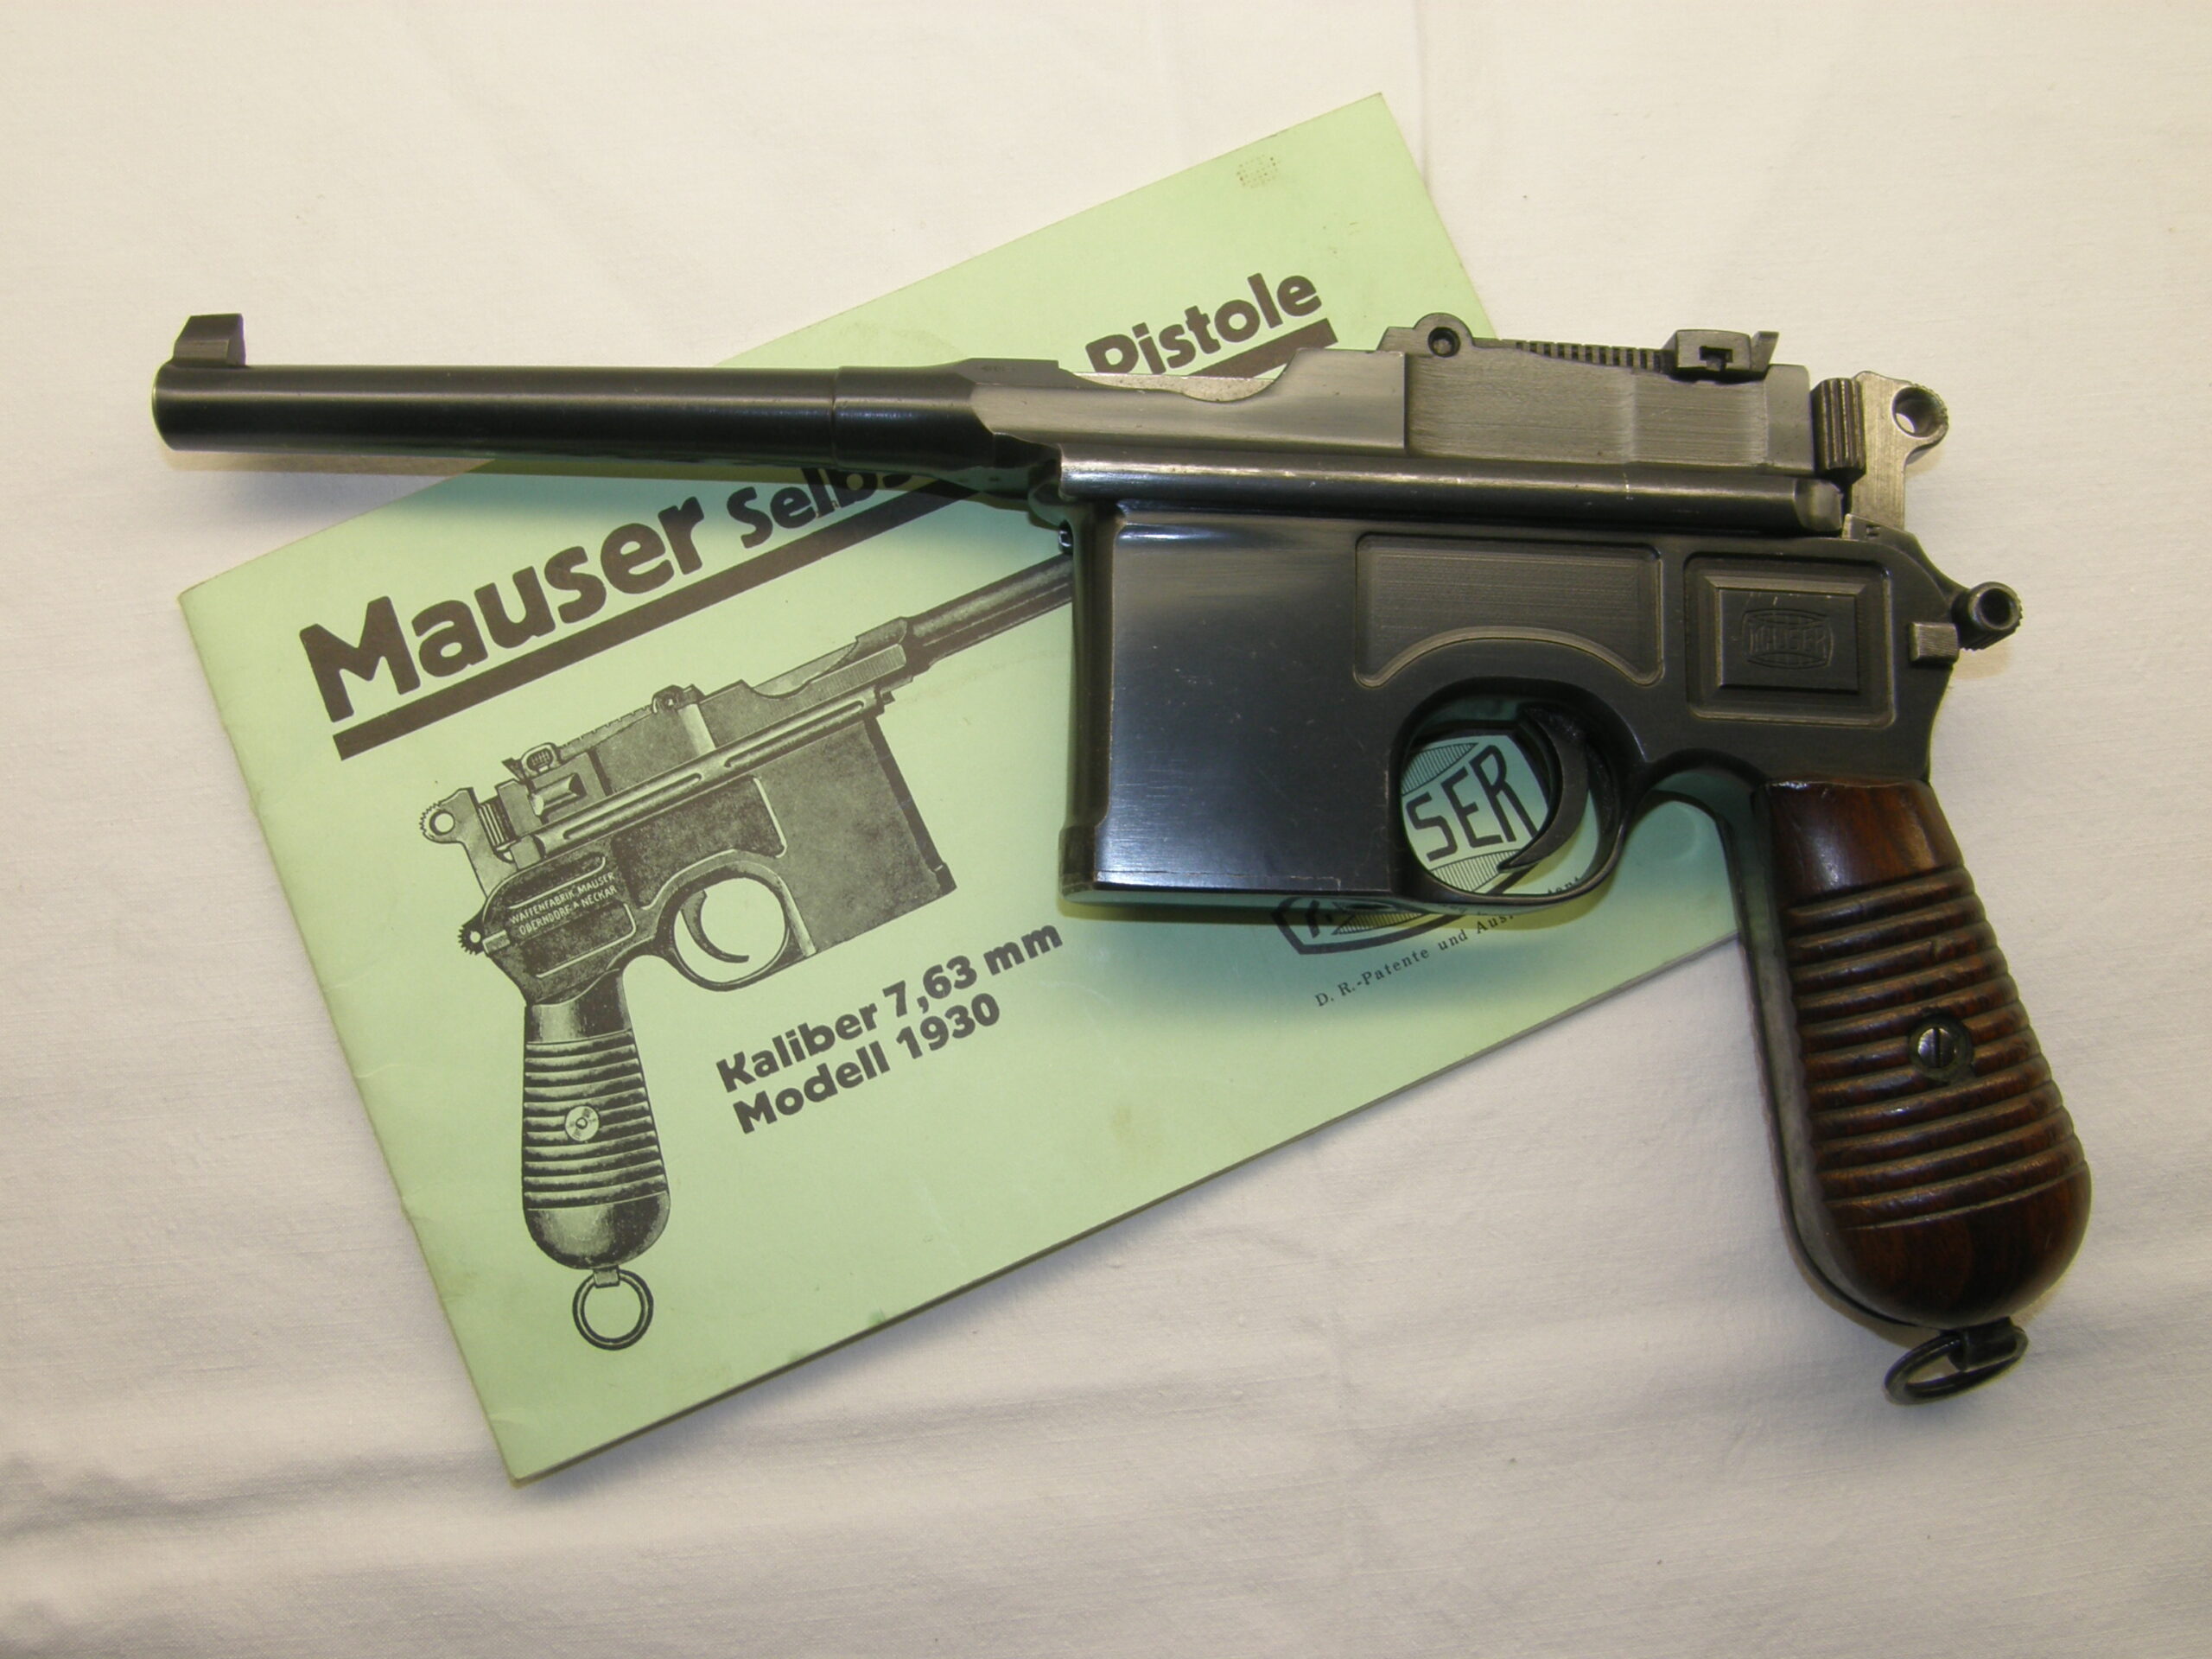 You are currently viewing Mauser C 96 Modell 1930